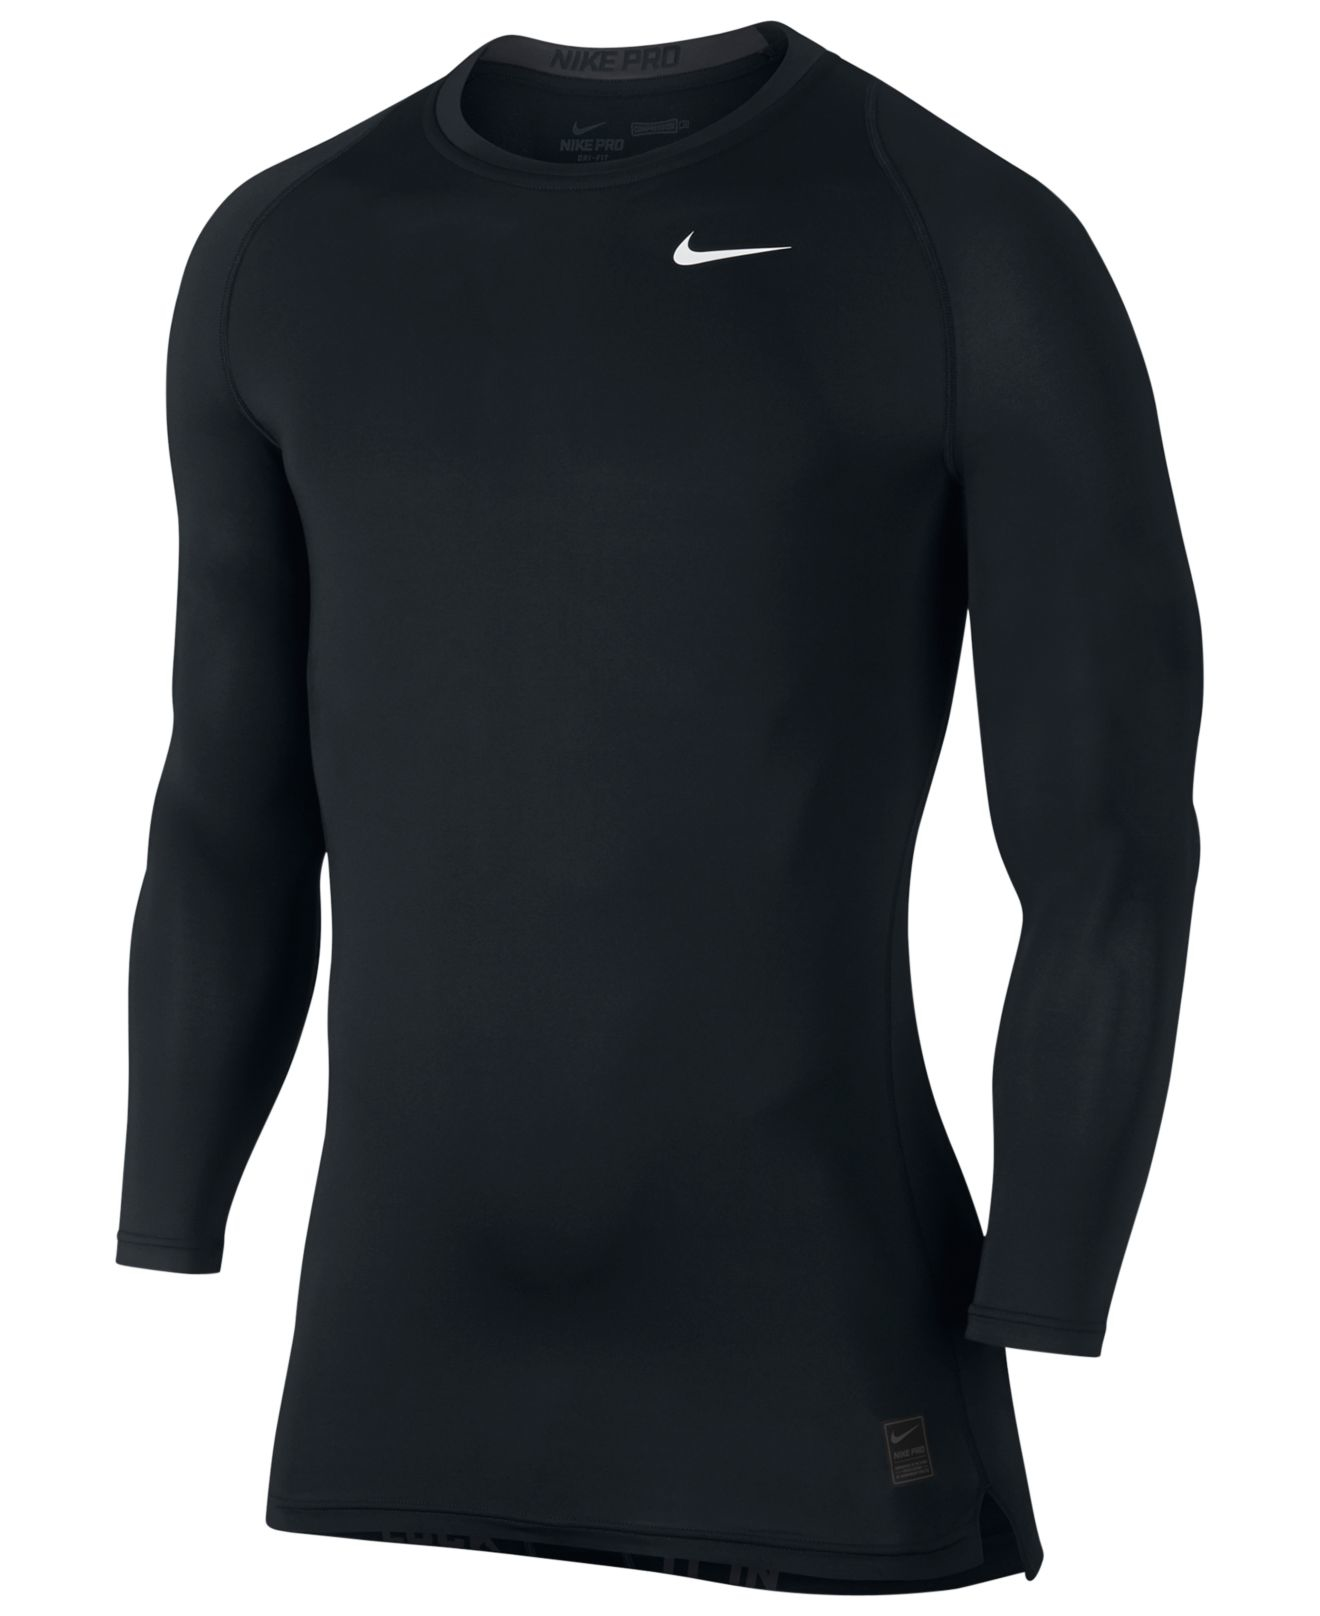 Lyst - Nike Cool Compression Shirt in Black for Men